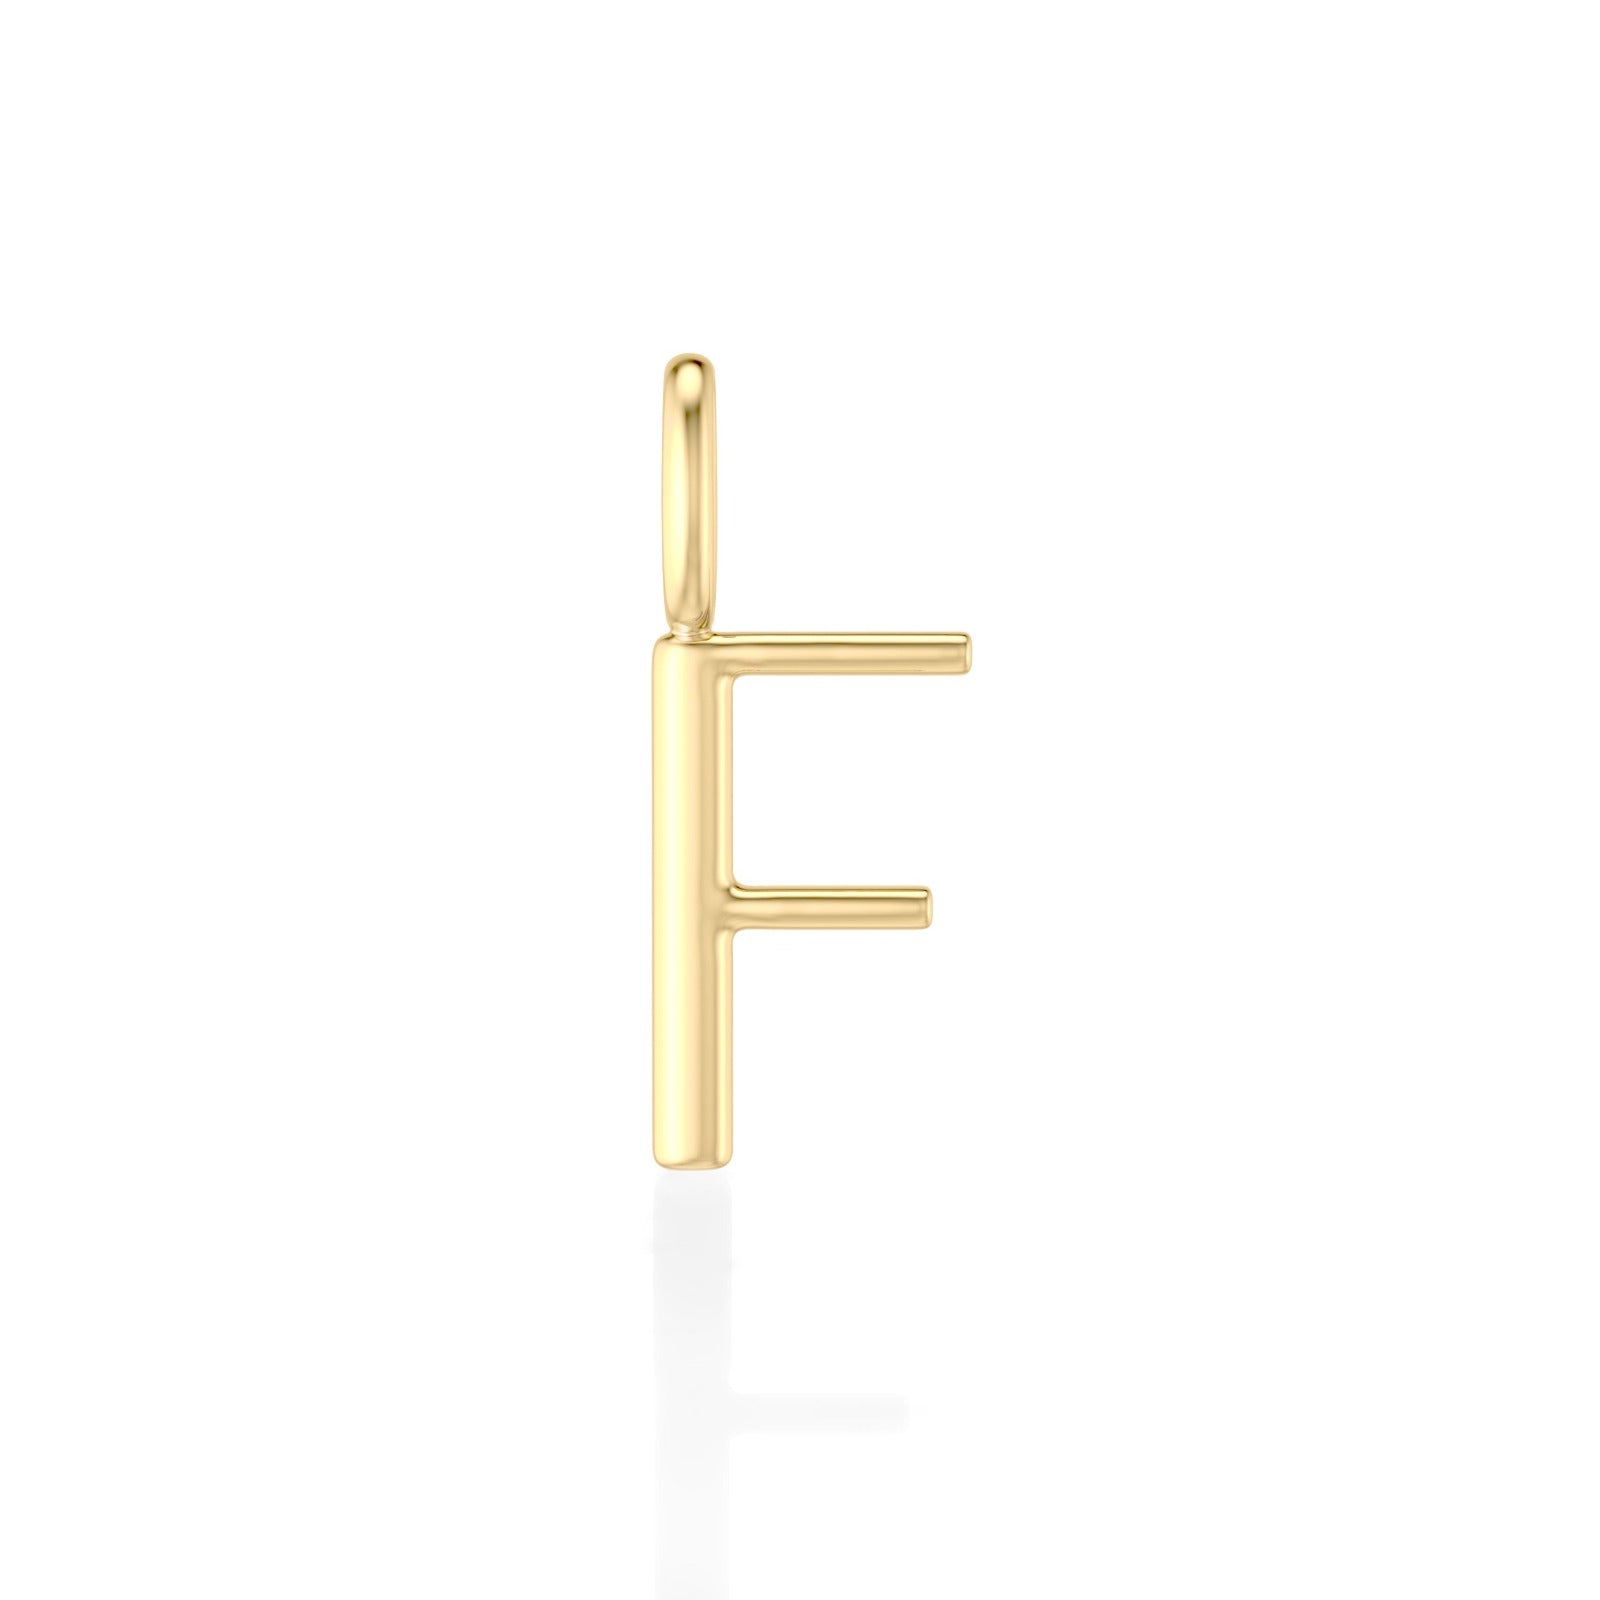 14K yellow gold F letter charm. 